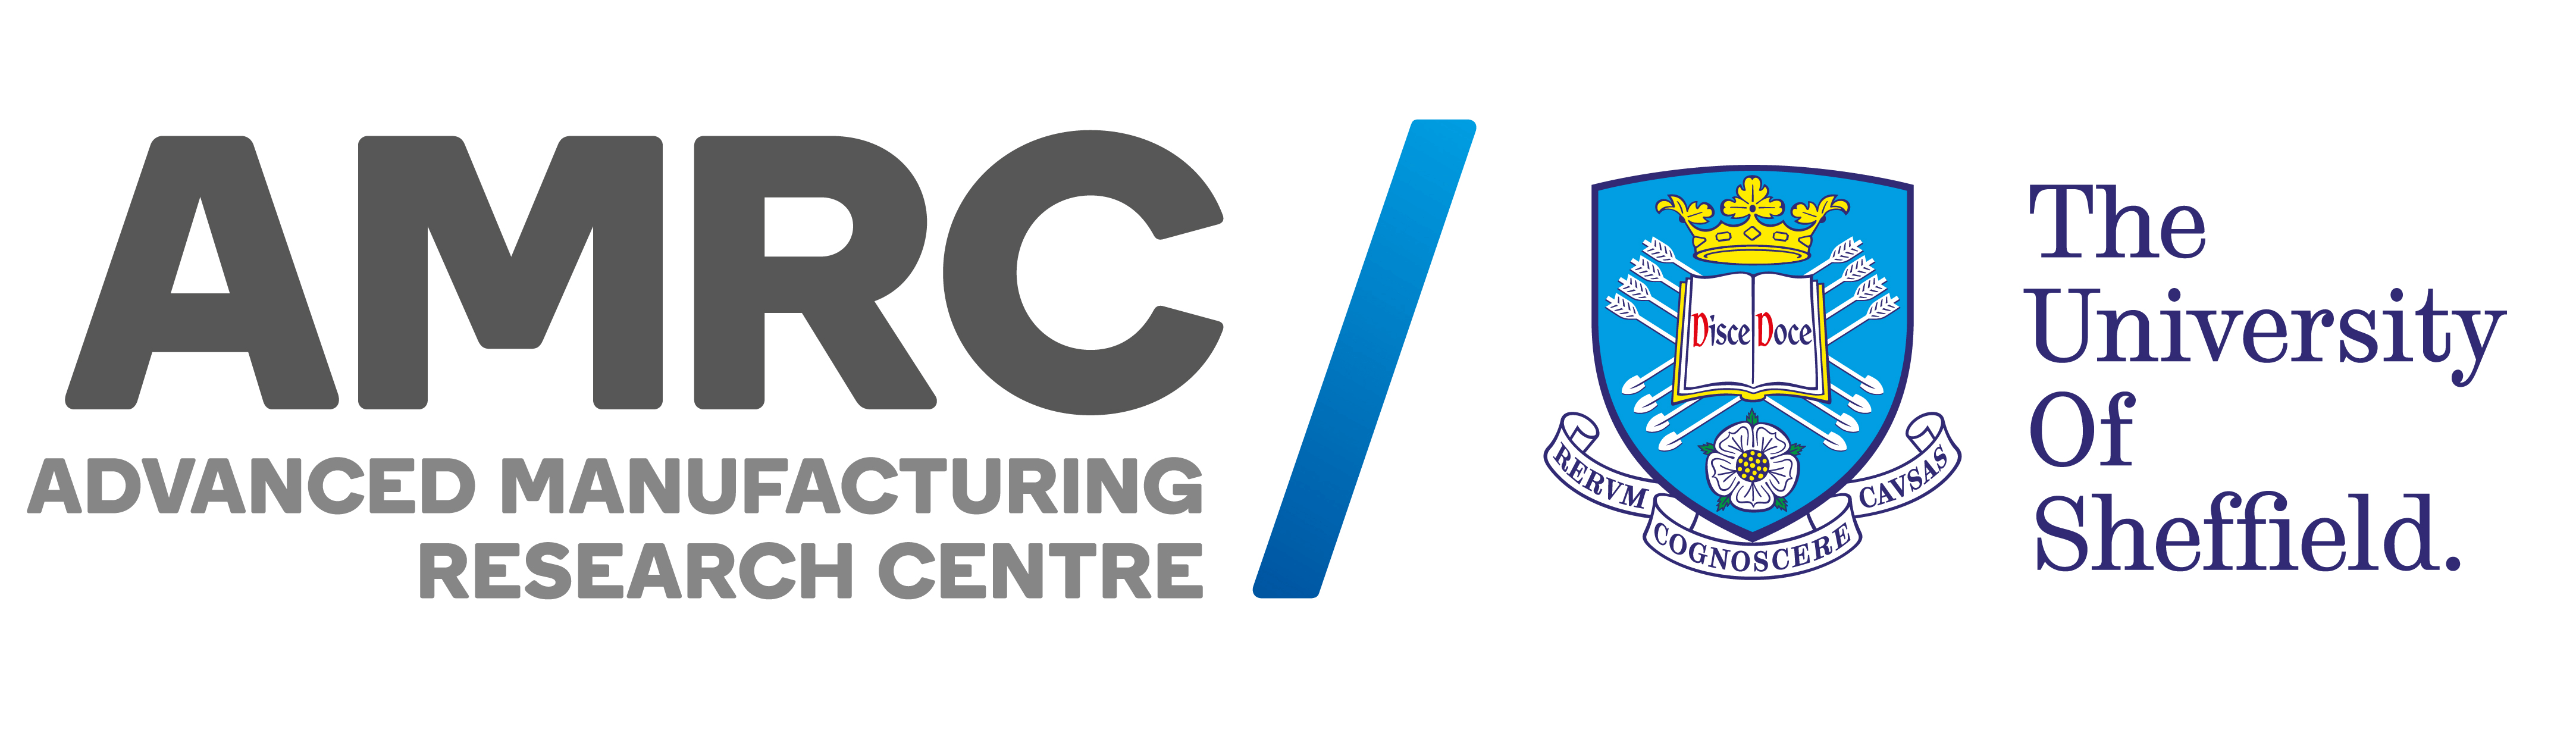 Old Boeing Logo - AMRC - The University of Sheffield Advanced Manufacturing Research ...